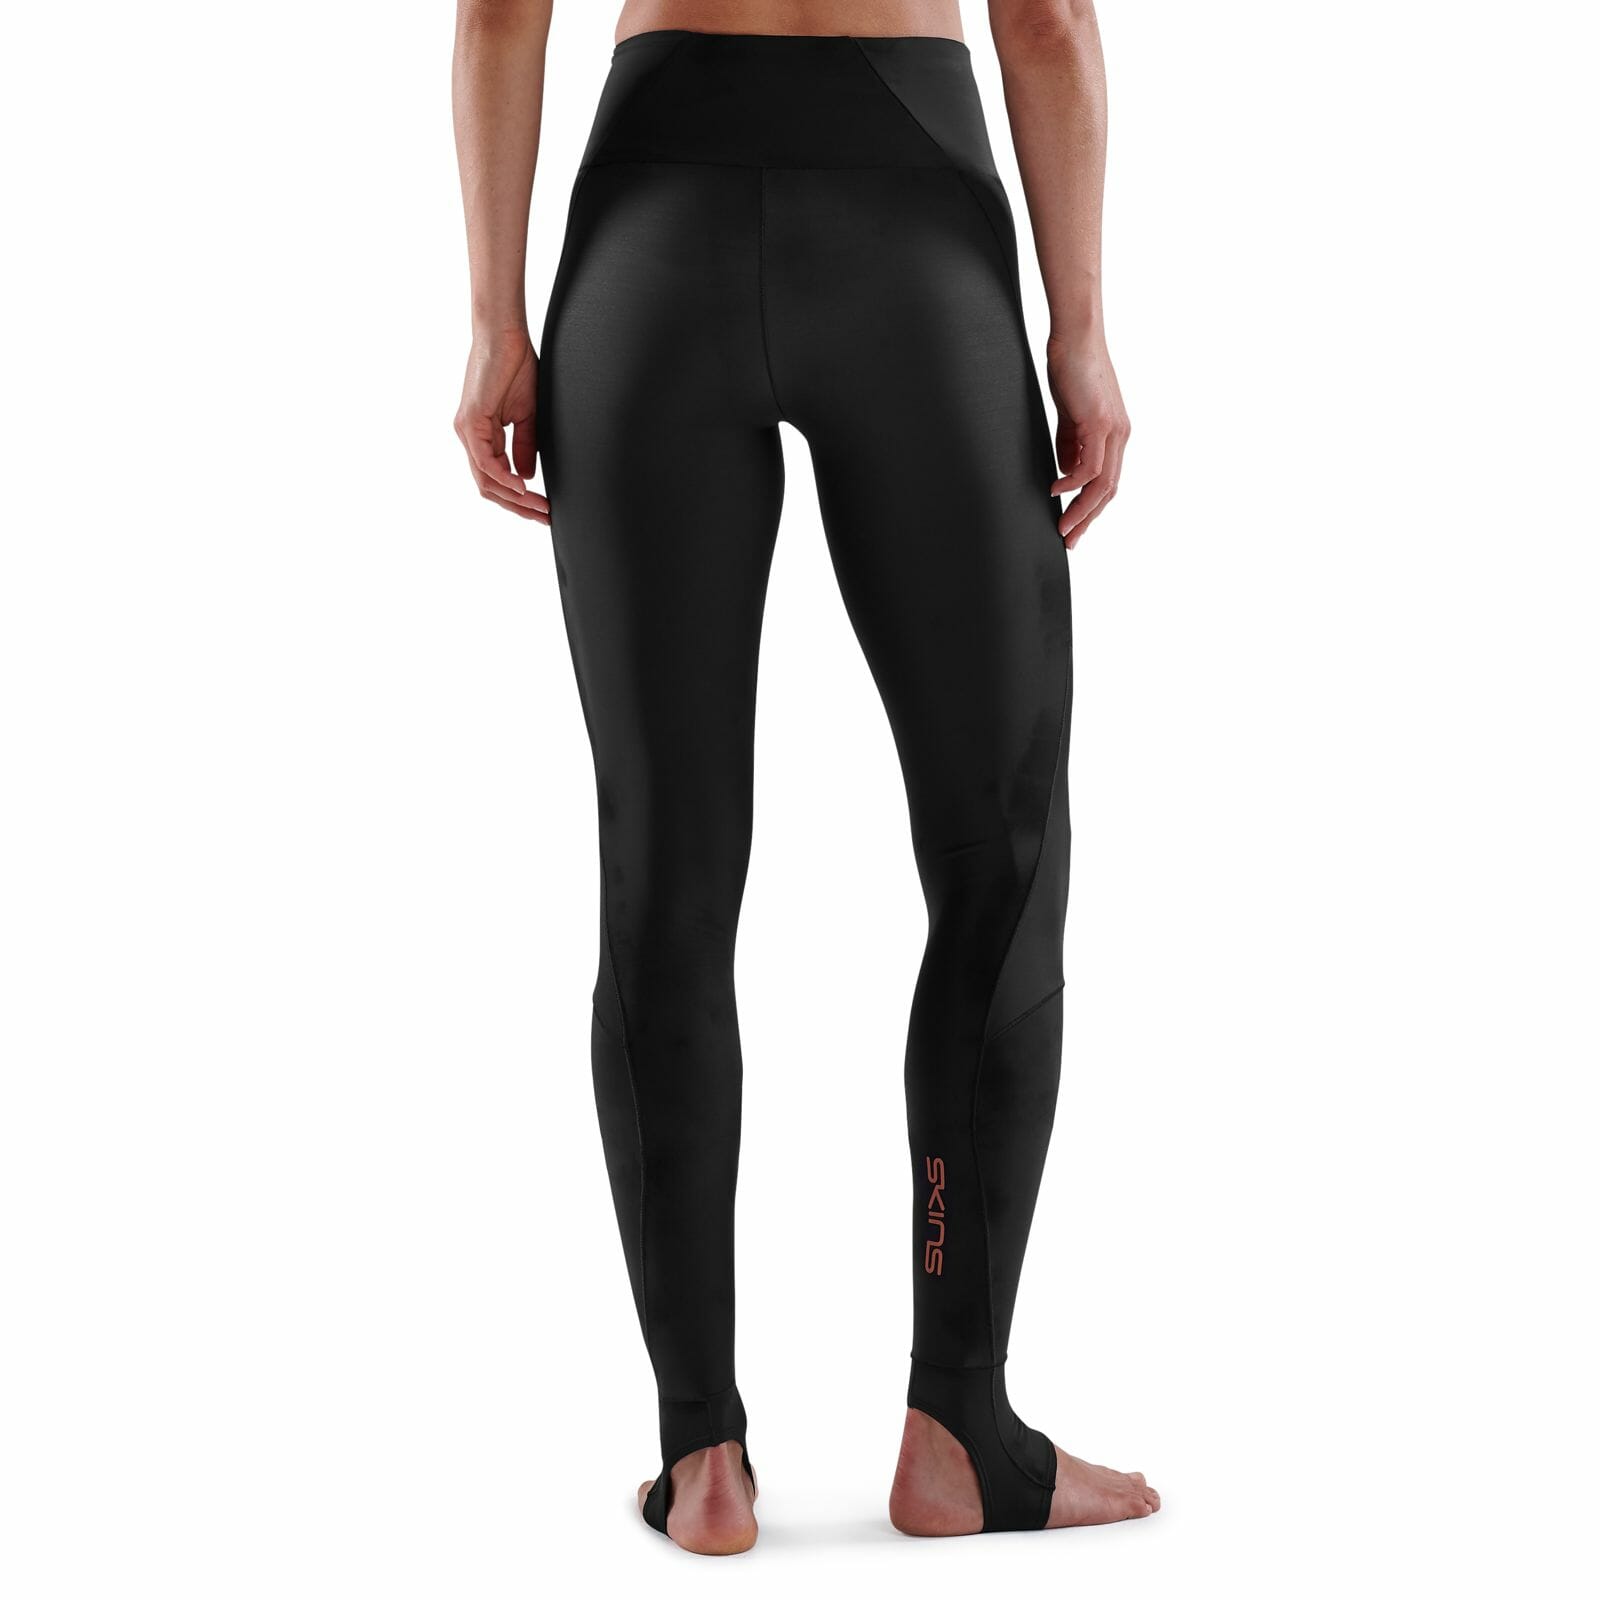 SKINS SERIES-5 Women's Travel & Recovery Long Tights Charcoal